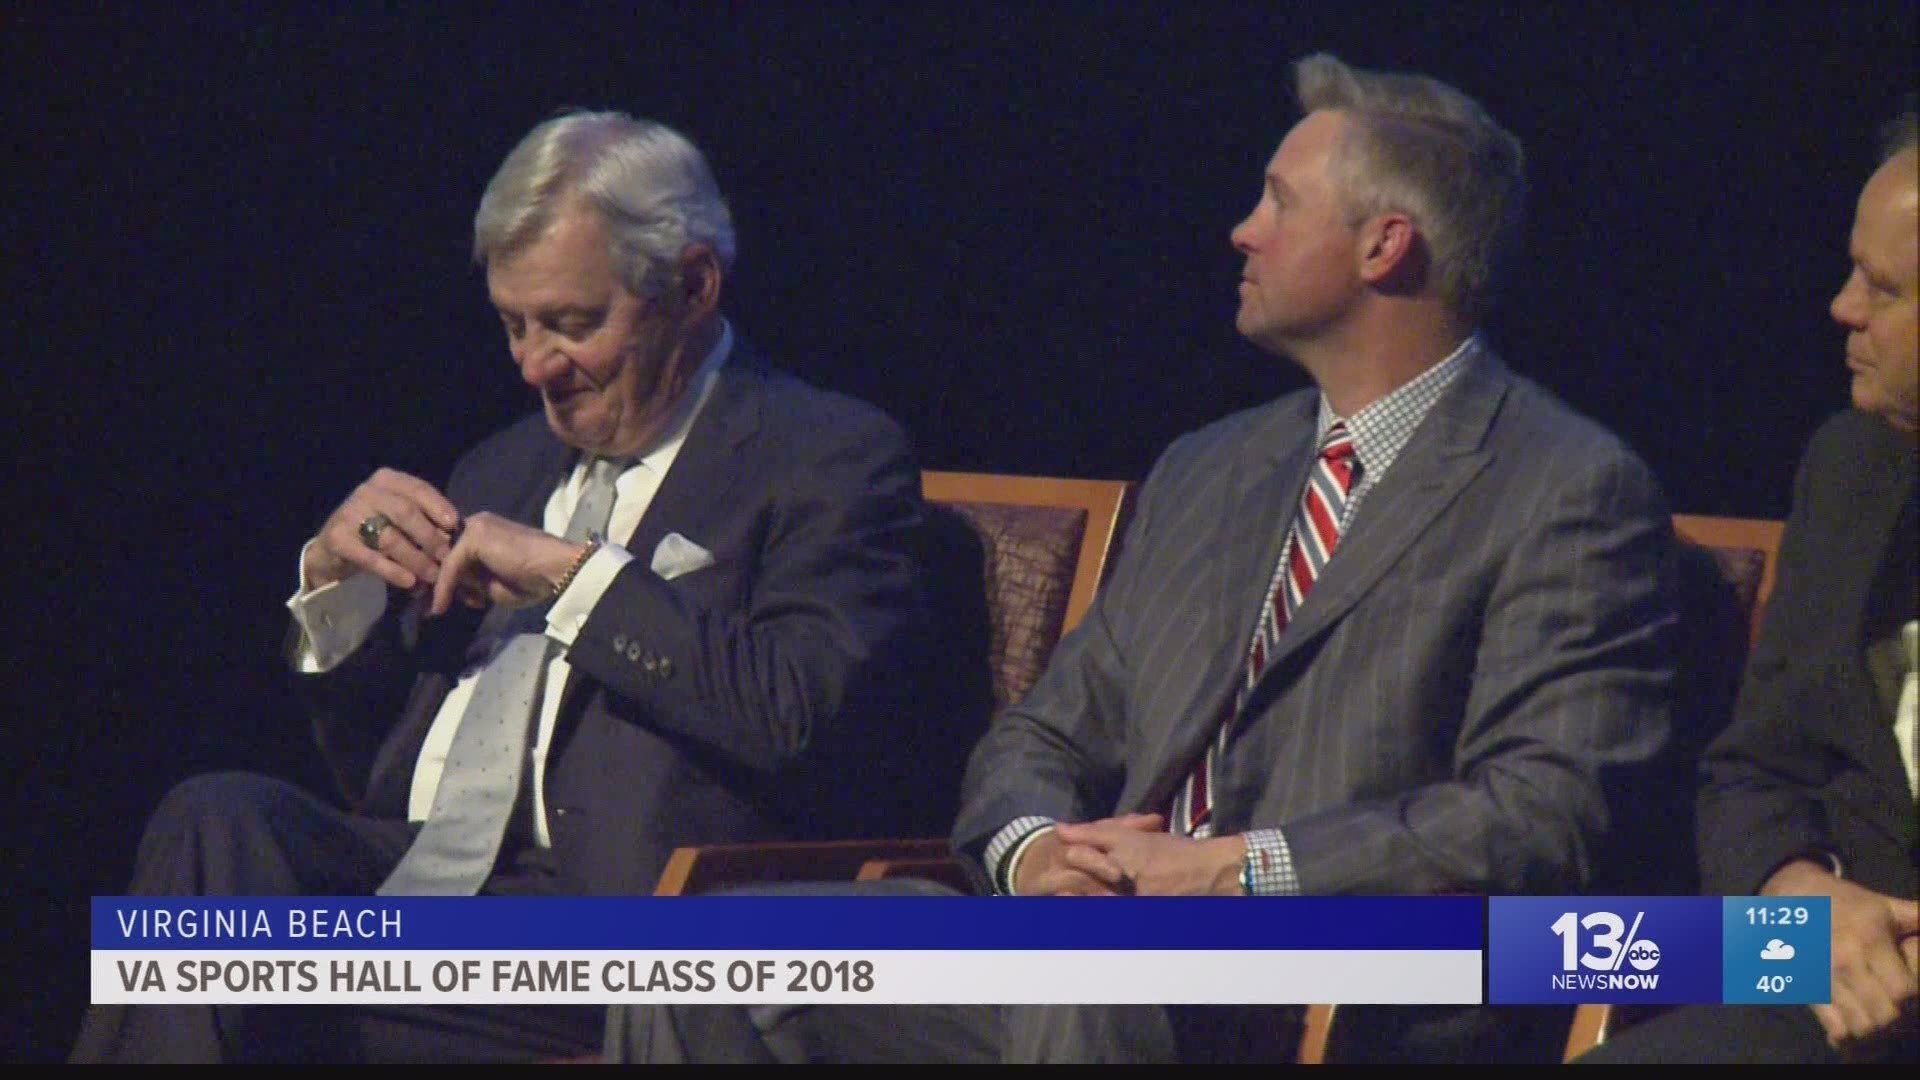 There are now 8 new members that will make the Virginia Sports Hall Of Fame class of 2018.